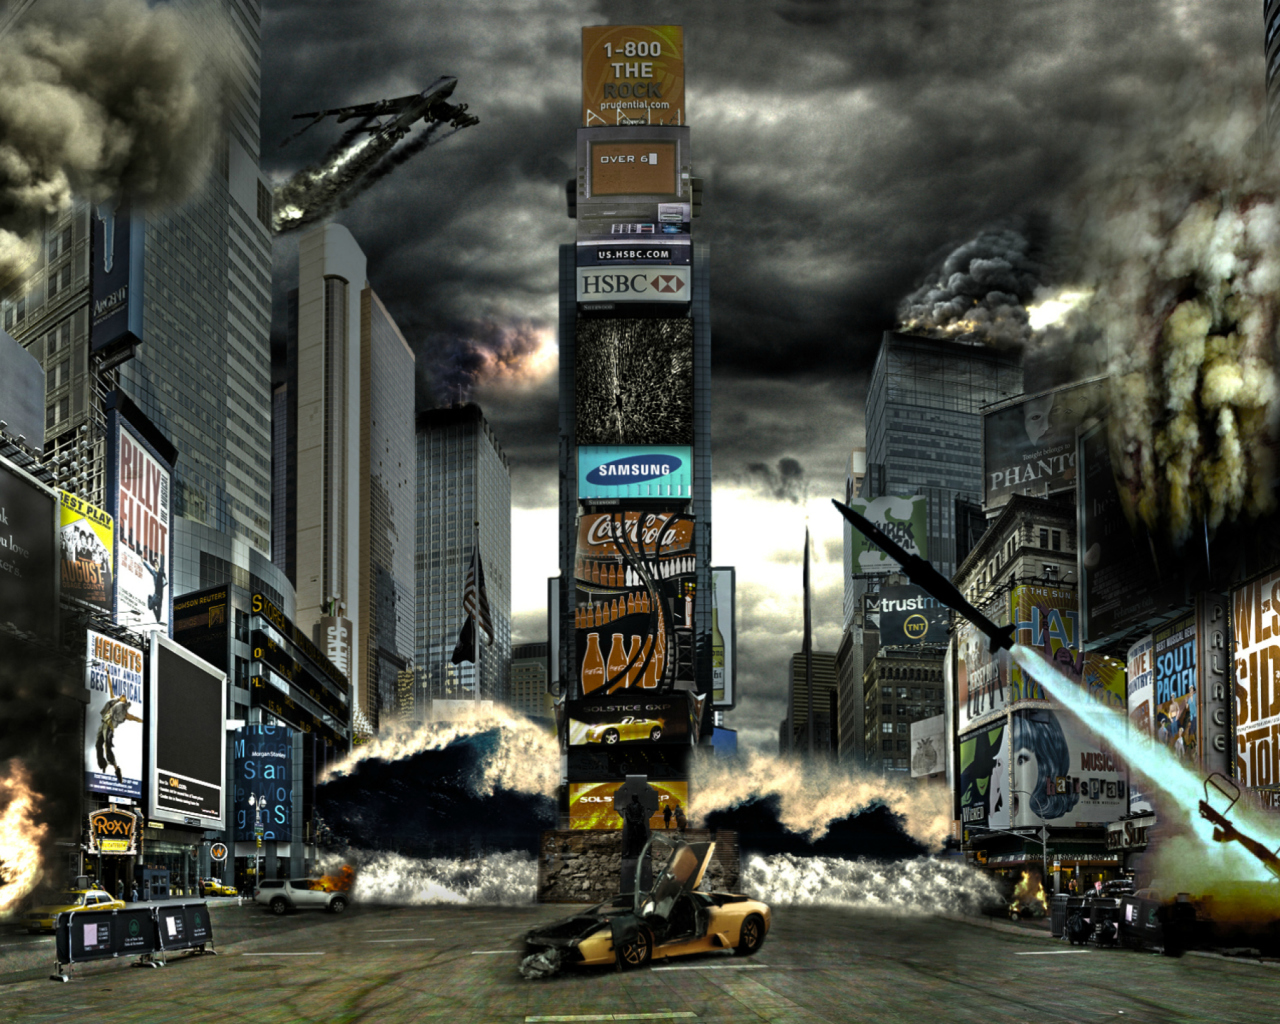 Times Square Disaster wallpaper 1280x1024